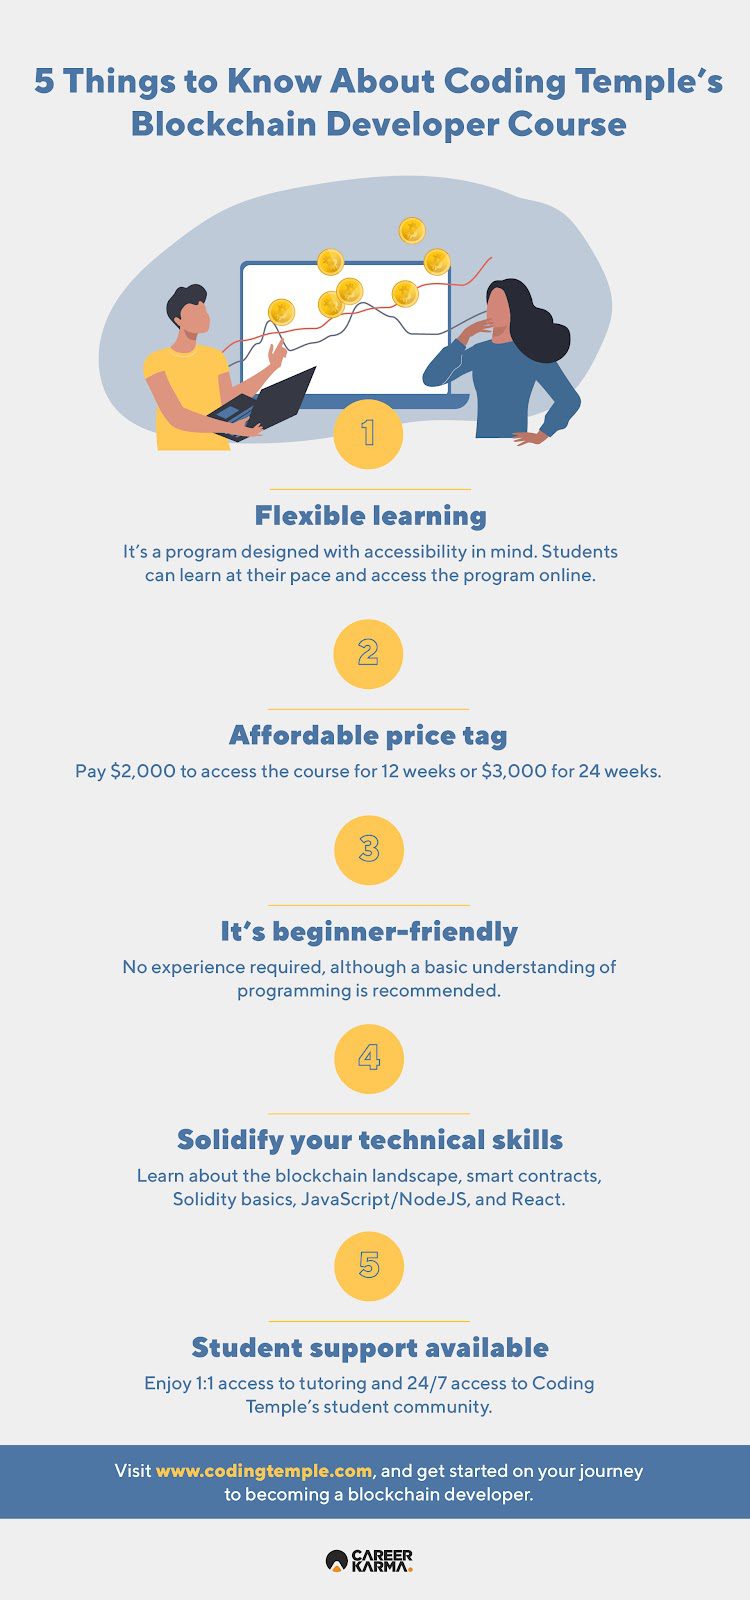 An infographic highlighting key features of Coding Temple’s Blockchain Developer course